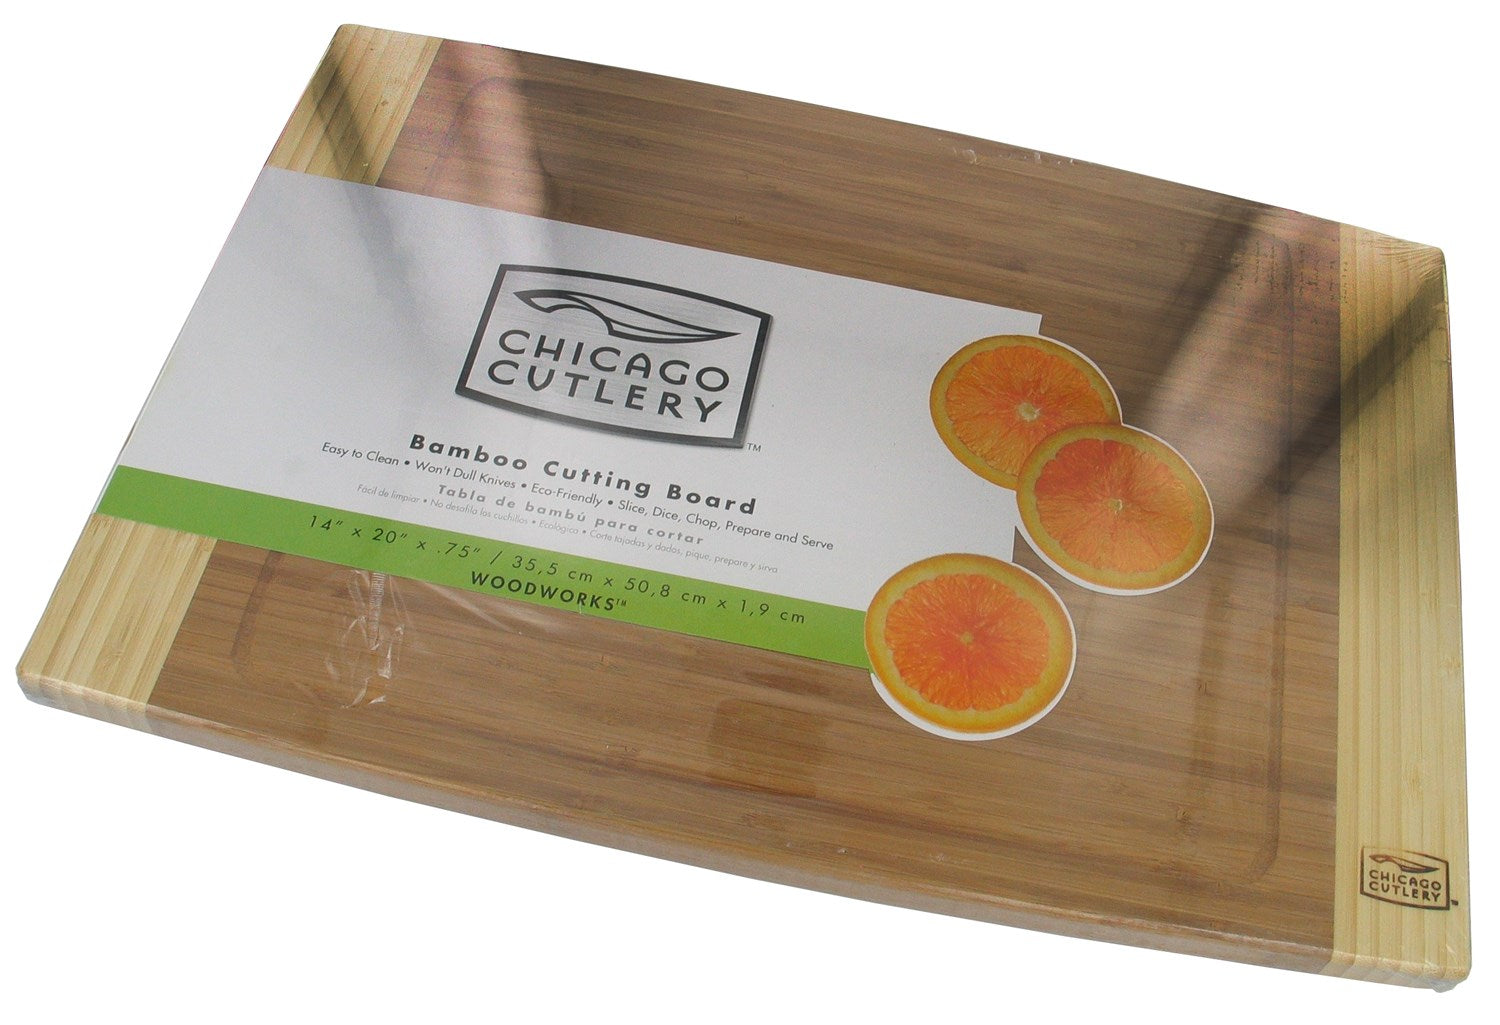 WORLD KITCHEN (CORNING REVERE), Chicago Cutlery 20 in. L X 14 in. W X 0.7 in. Bamboo Cutting Board